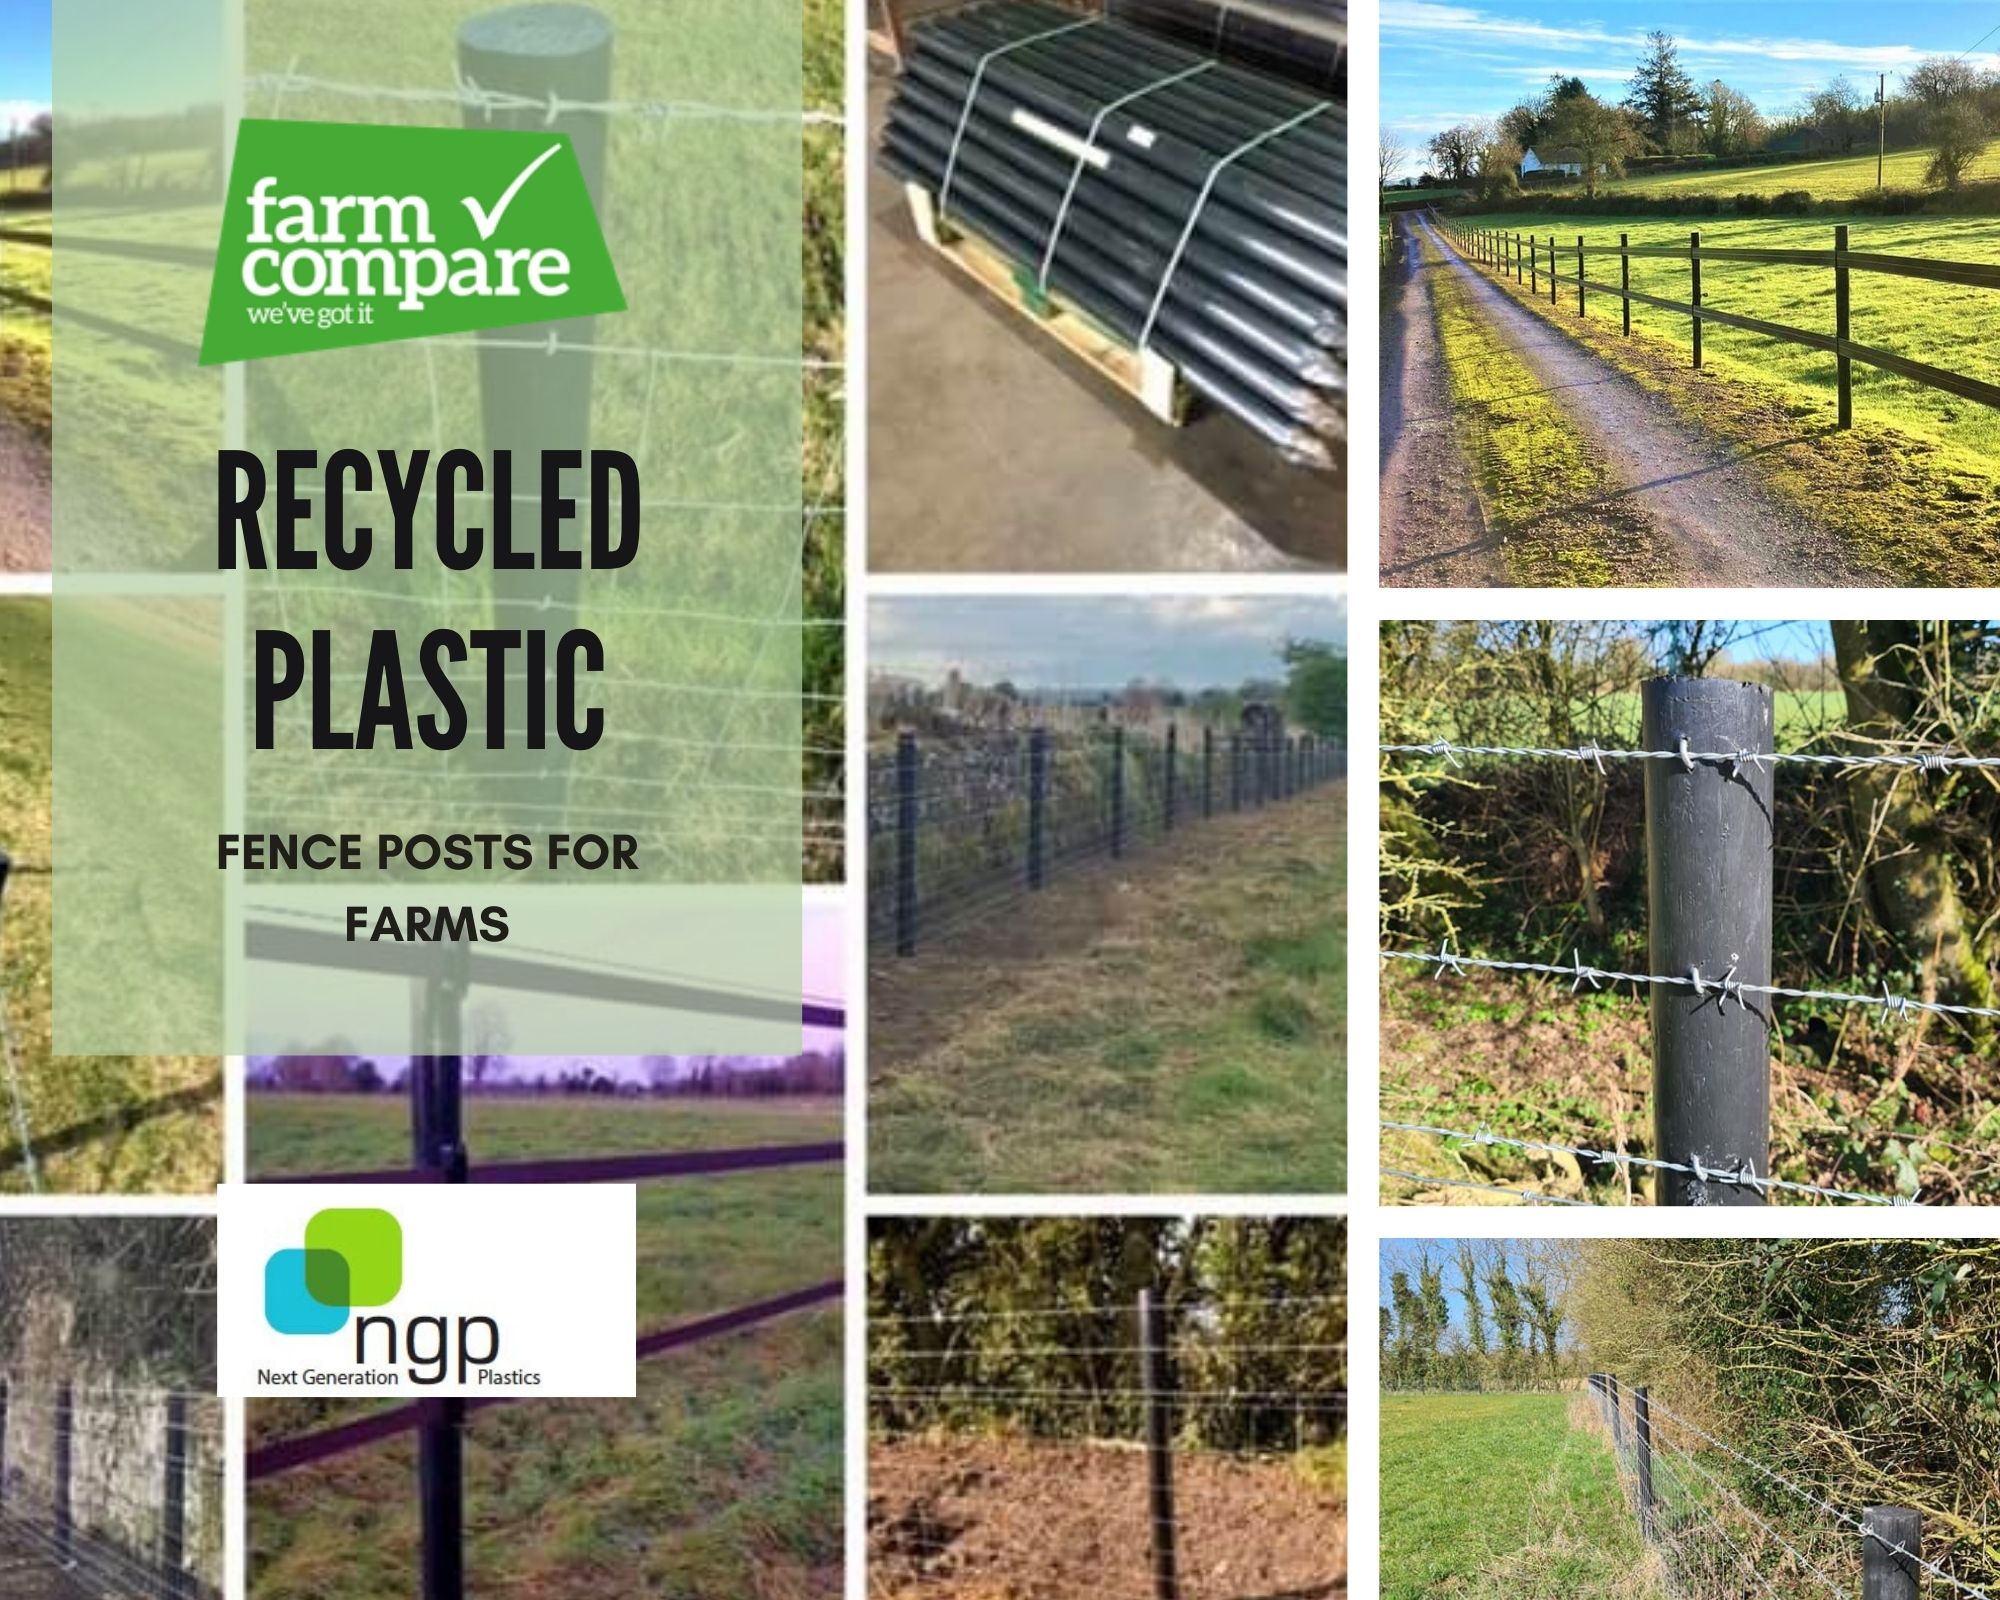 Recycled plastic takes on a new shape—fence posts for farms 